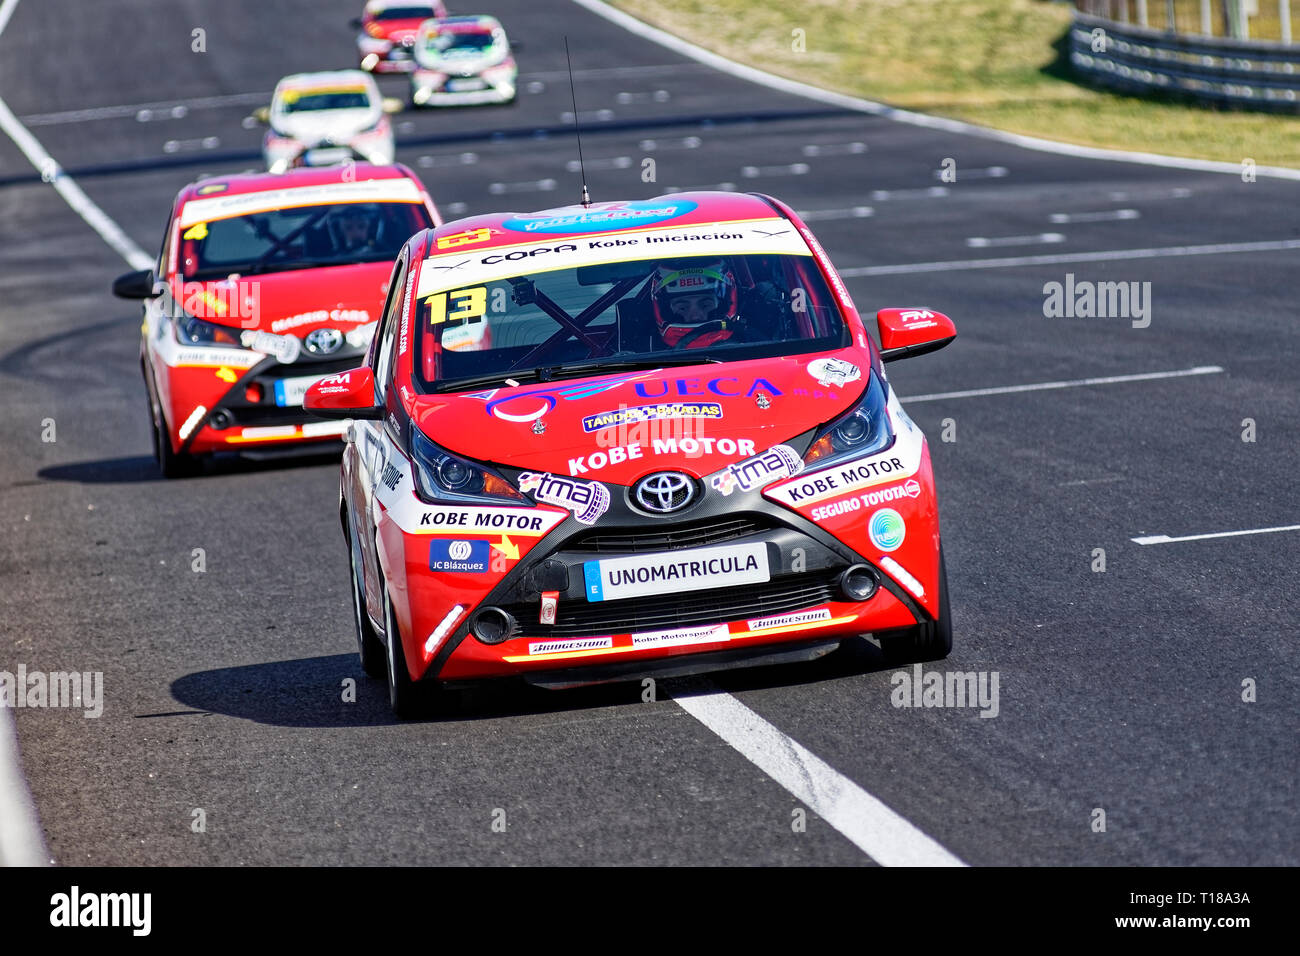 Madrid, Spain. 23rd March, 2019. First test of the Kobe Circuit Cup of the Toyota Aygo at the Jarama Circuit in Madrid, Spain. Credit: EnriquePSans/Alamy Live News Stock Photo